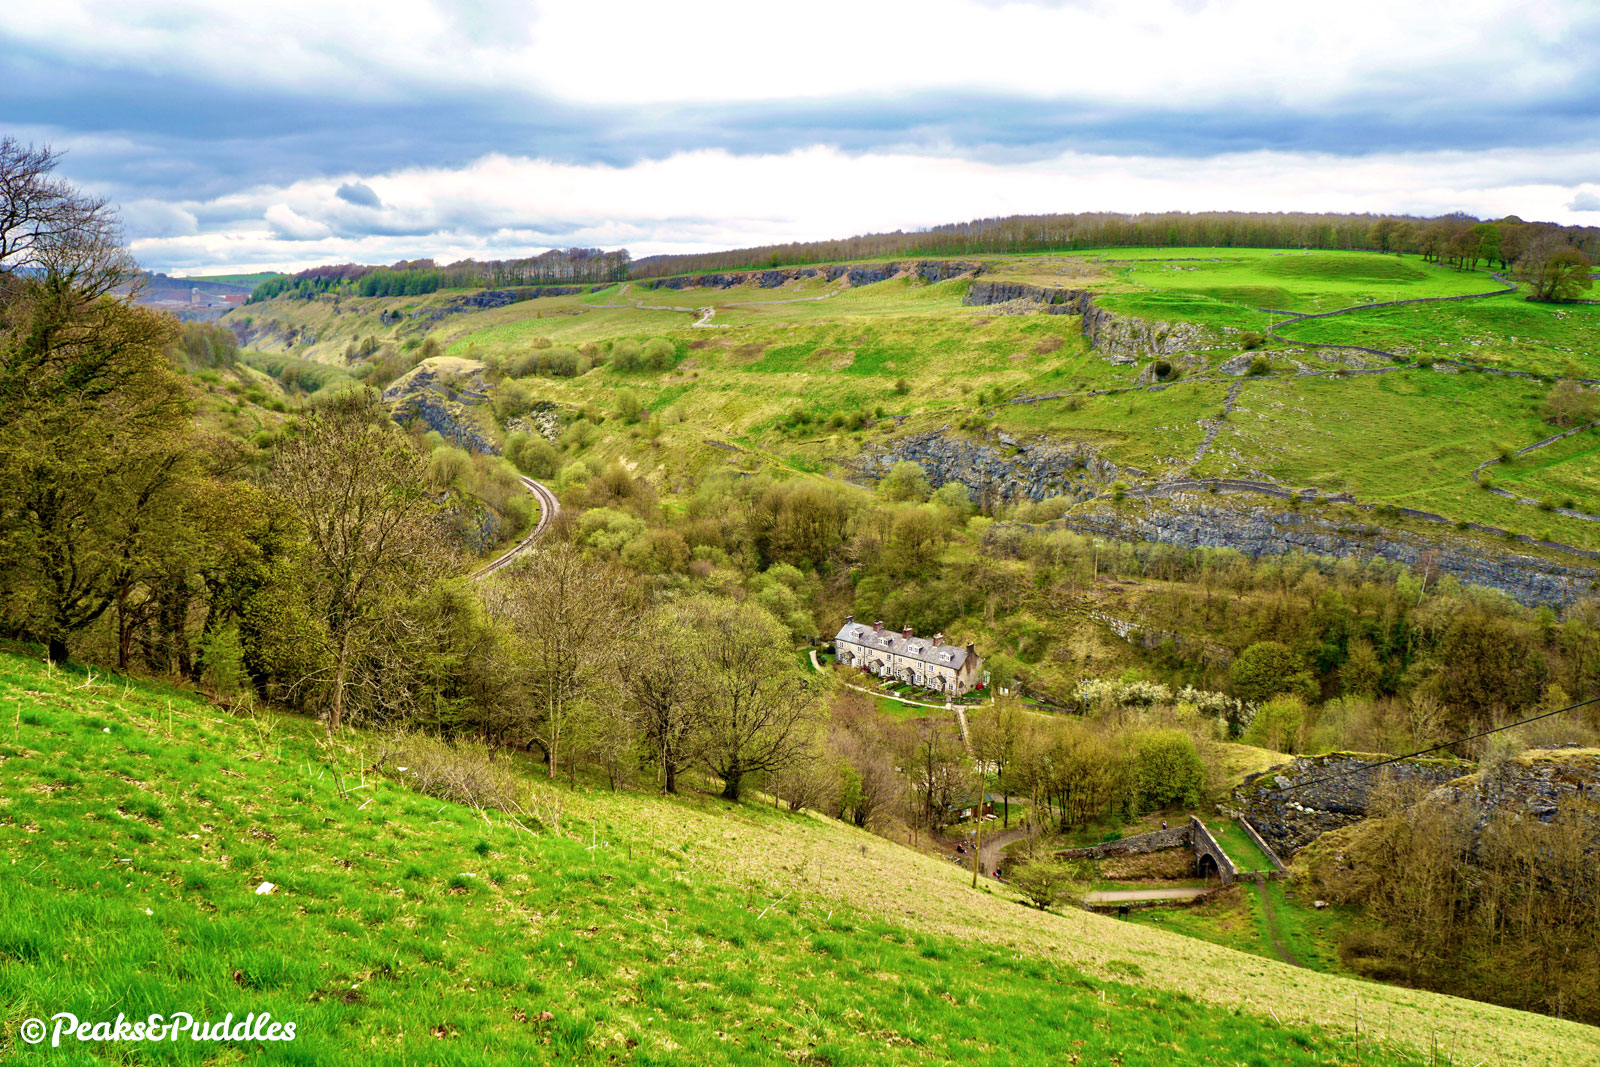 High above Monsal Trail, a lay-by on the A6 offers this stunning view over Blackwell Mill, showing the remaining Great Rocks quarry line curving around one side of what was once a large triangular junction surrounding the cottages. The trail is bottom right.